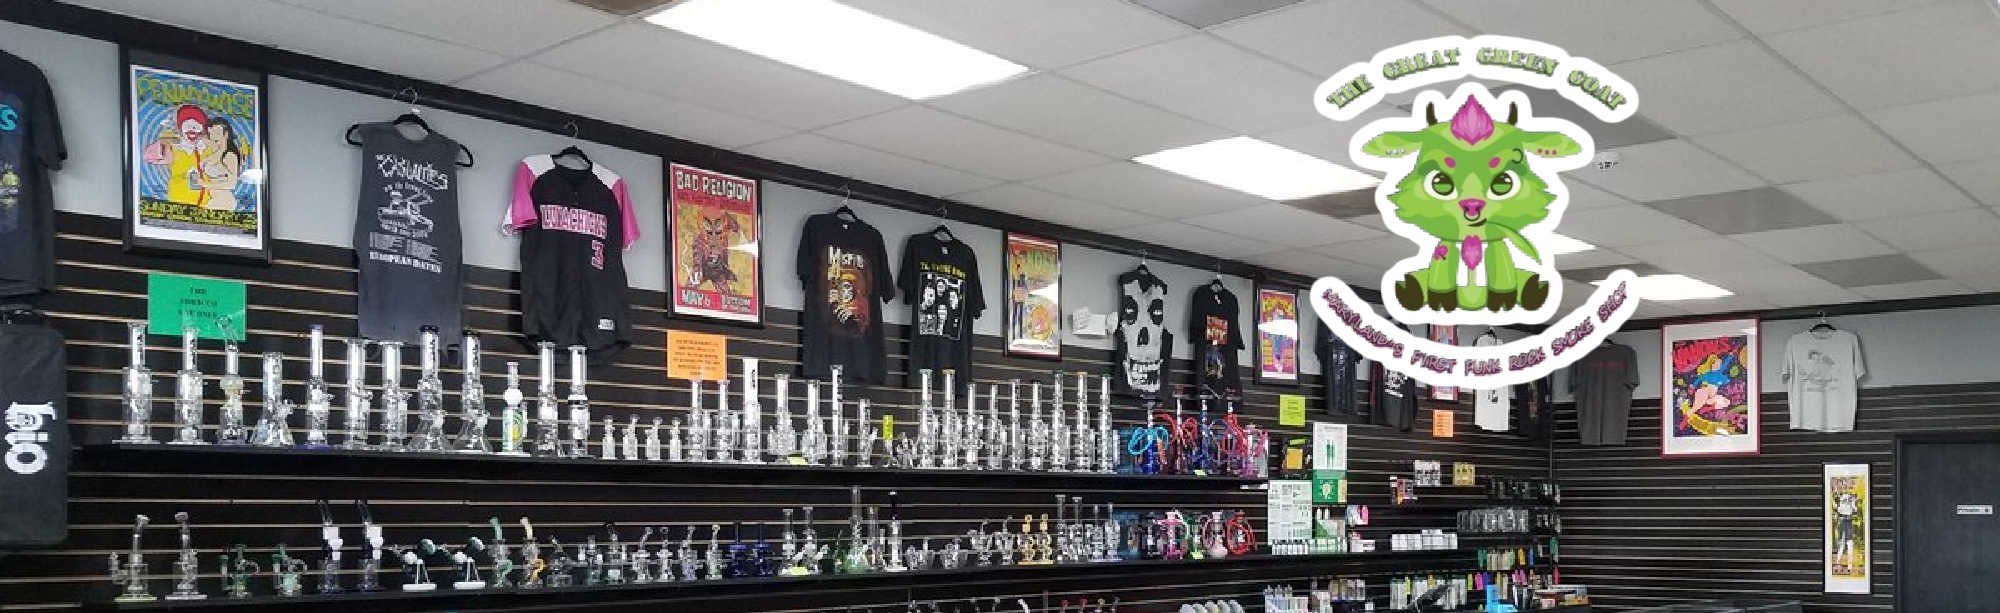 image of the great green goat smoke shop in frederick md